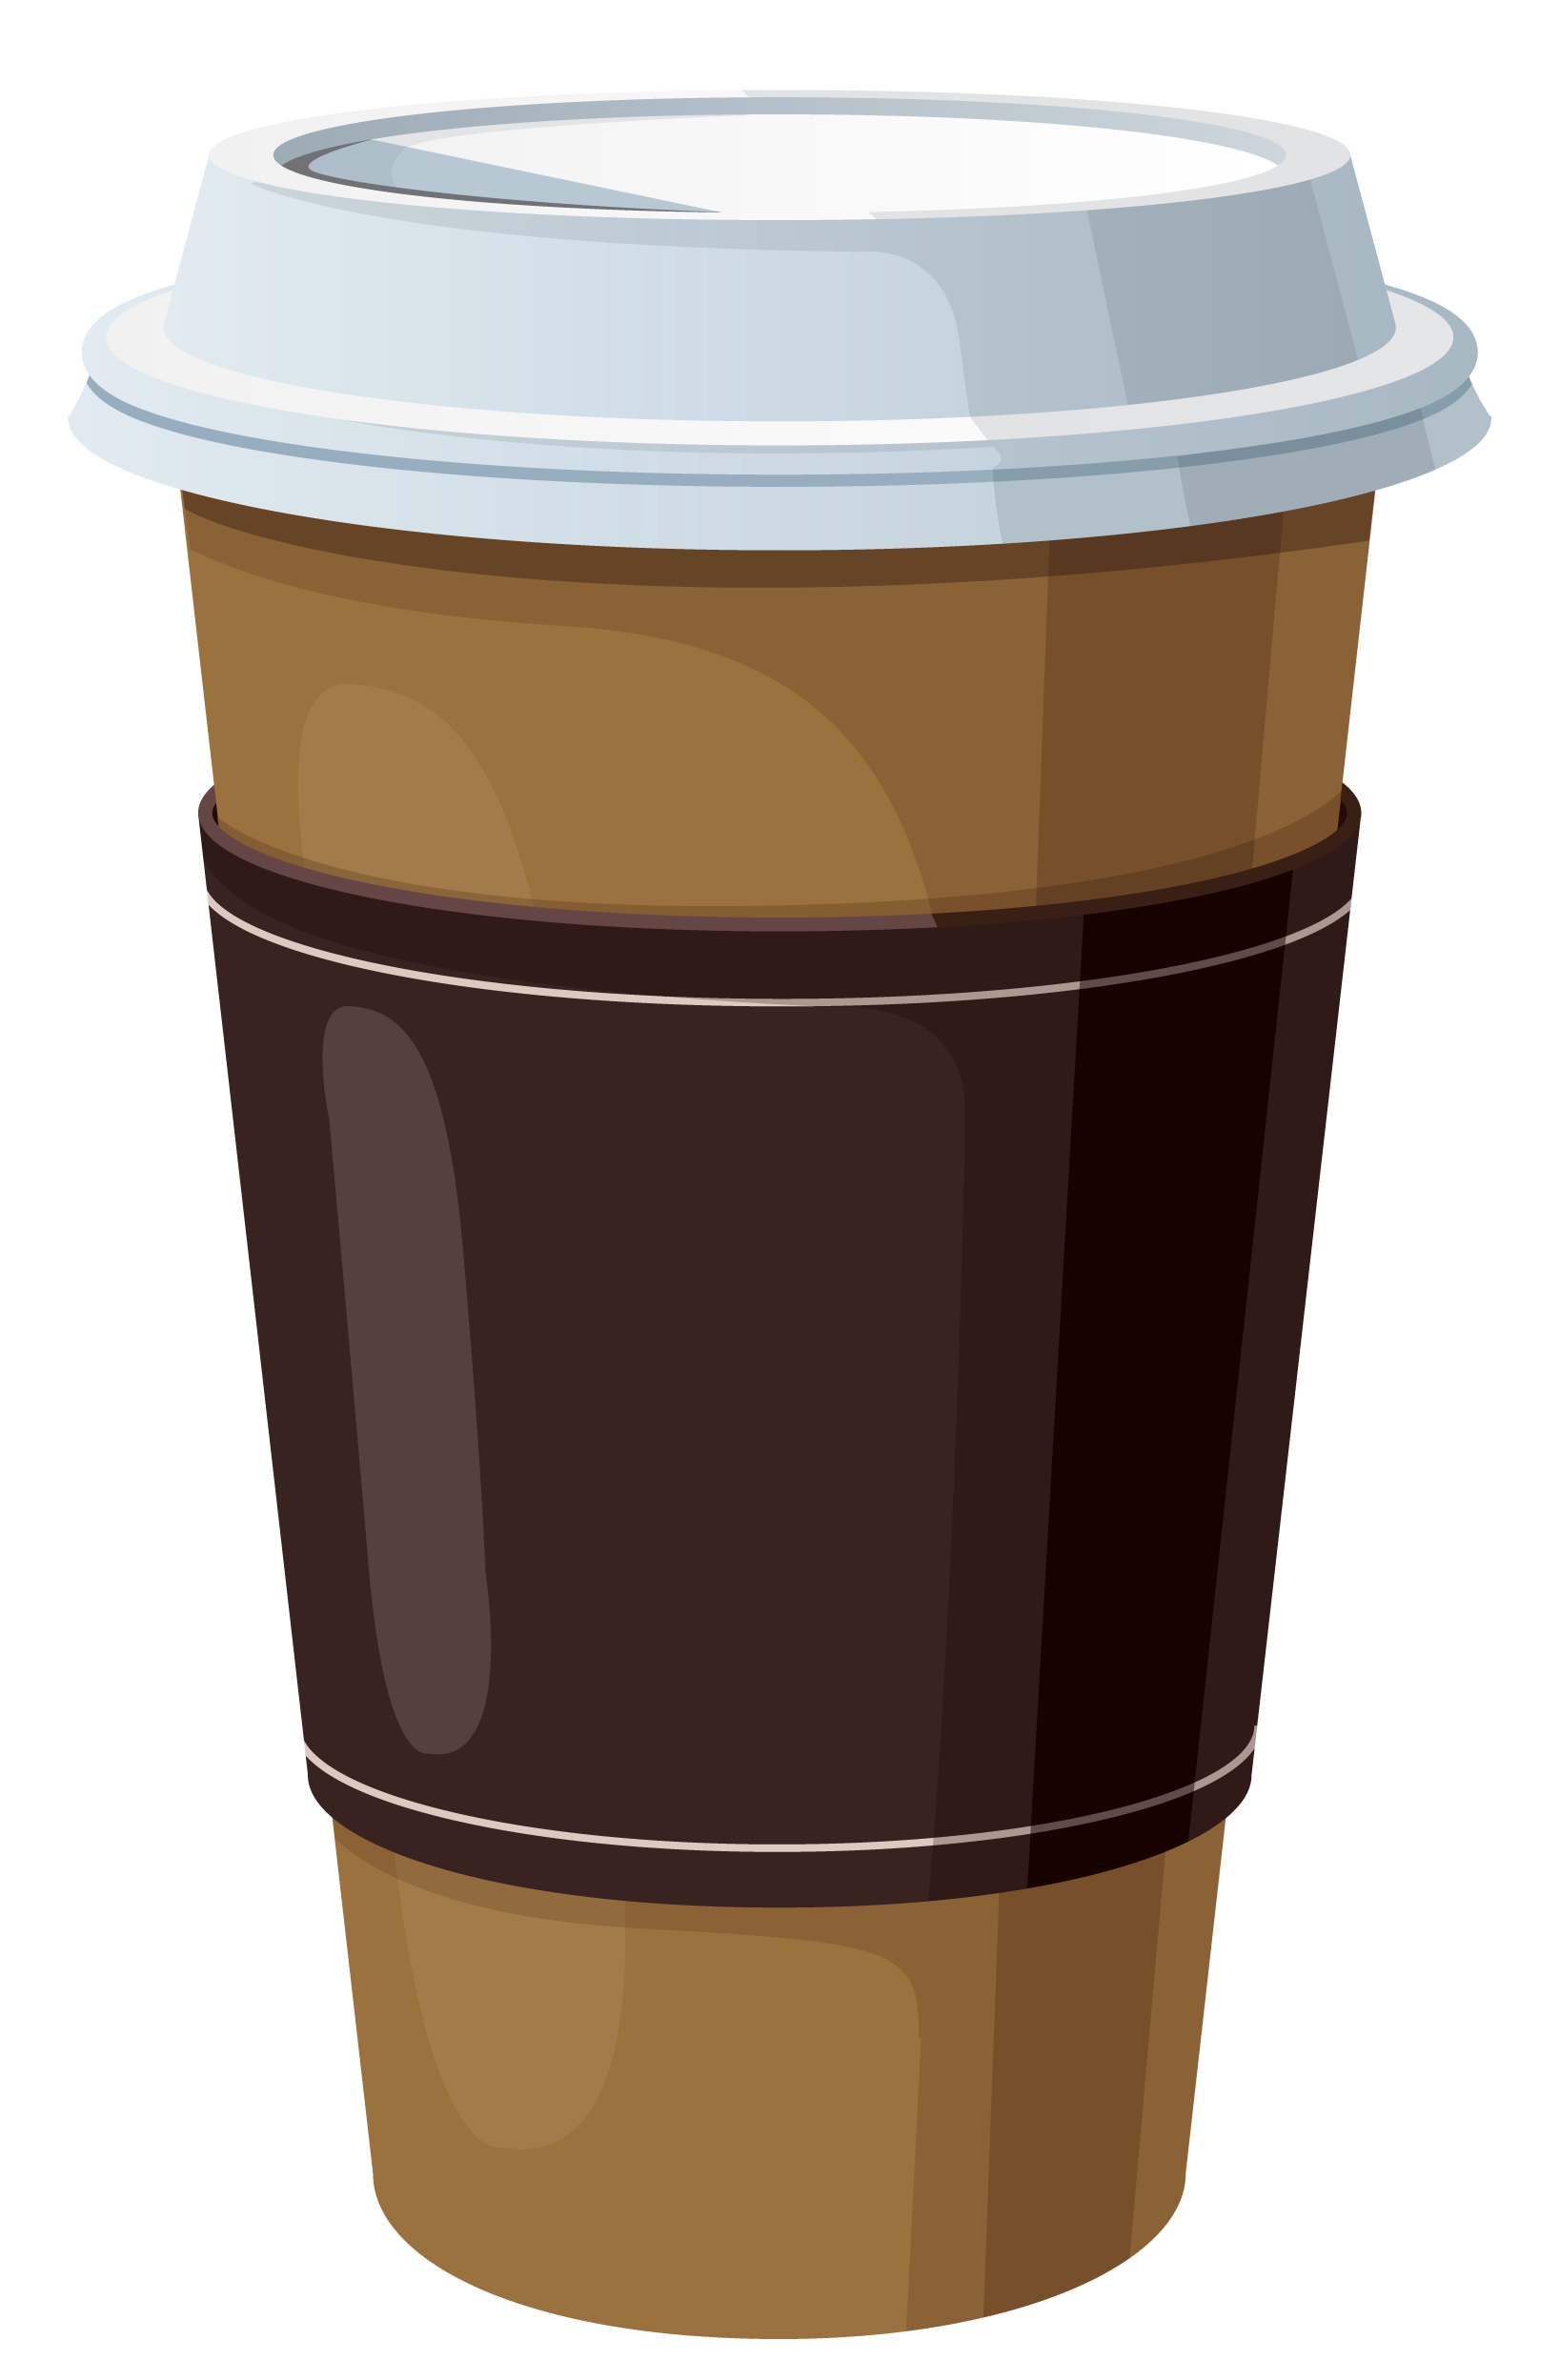 Coffee cup coffee mug clip art free vector for free download about free